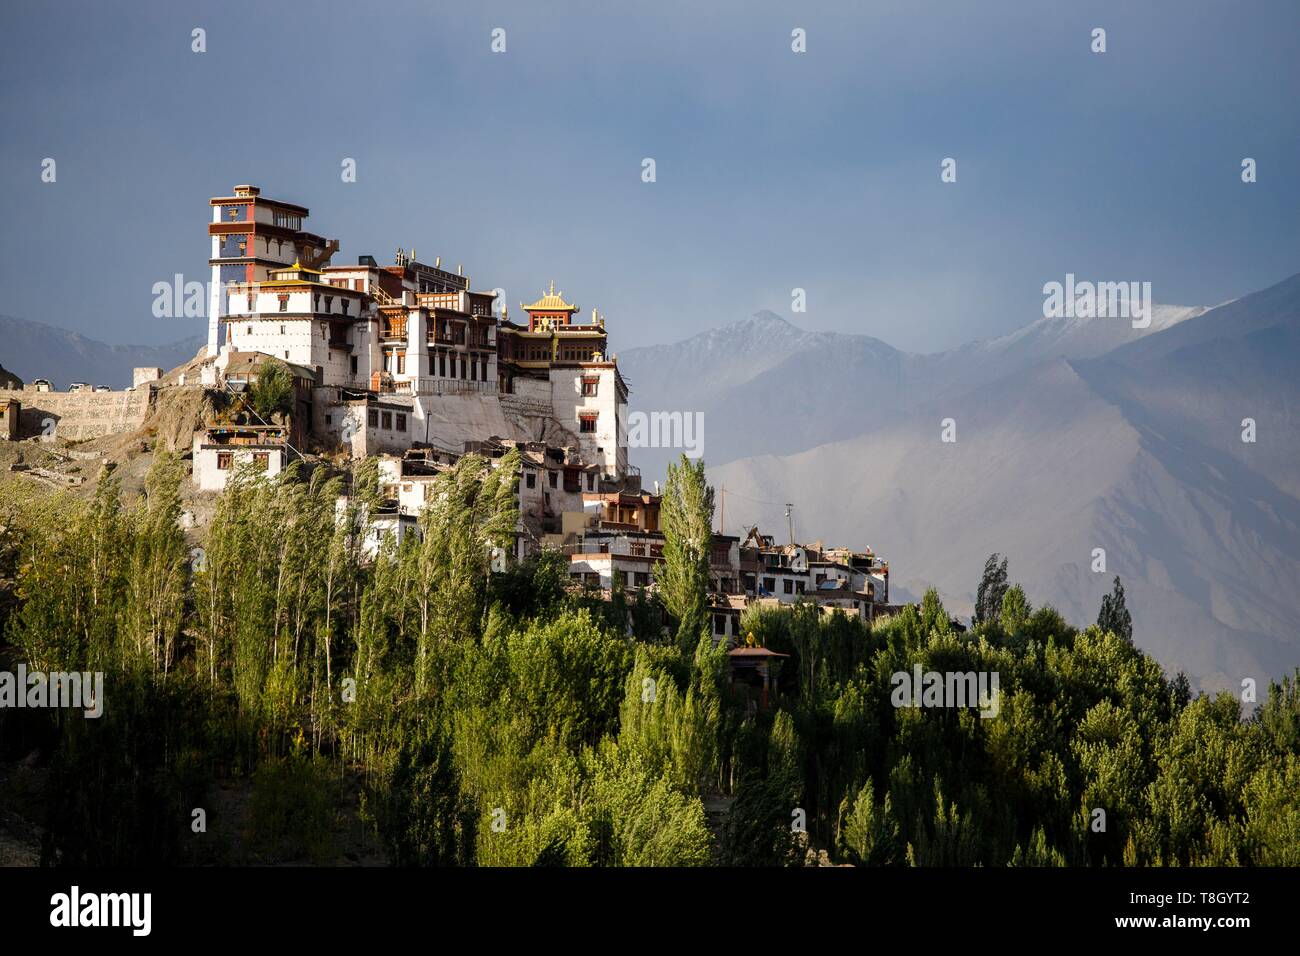 India, state of Jammu and Kashmir, Himalaya, Ladakh, Indus valley, Matho monastery (gompa) dominated by the colorful tower of the building housing the new Matho museum, in the background the Ladakh mountain range Stock Photo